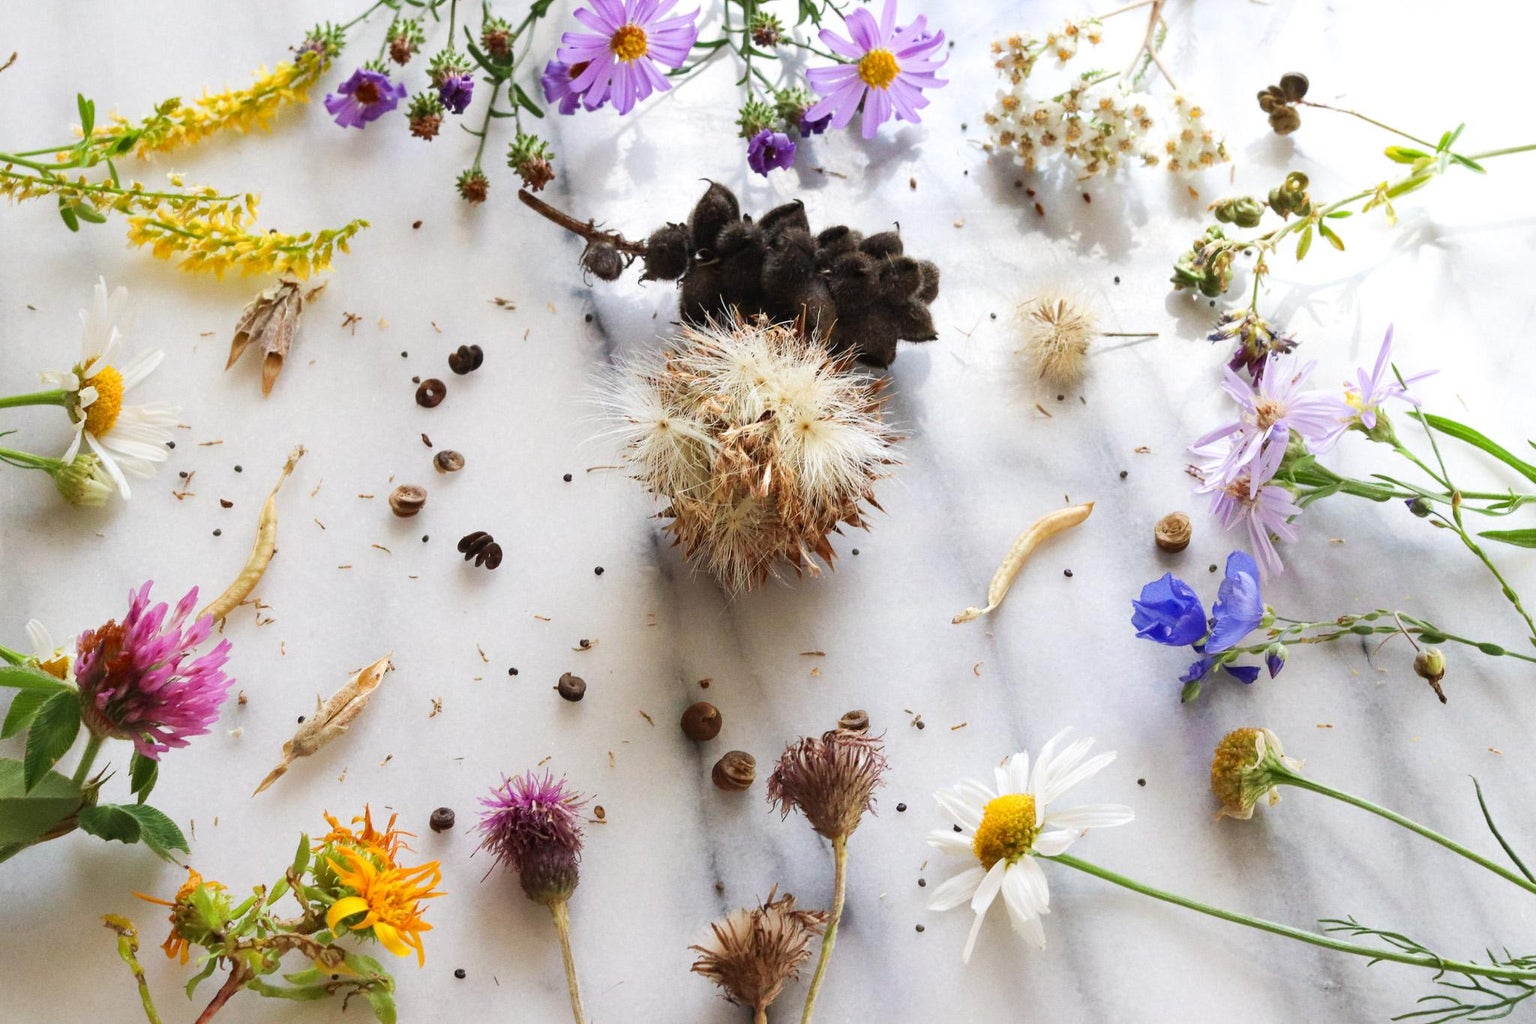 How to Gather Wildflower Seeds